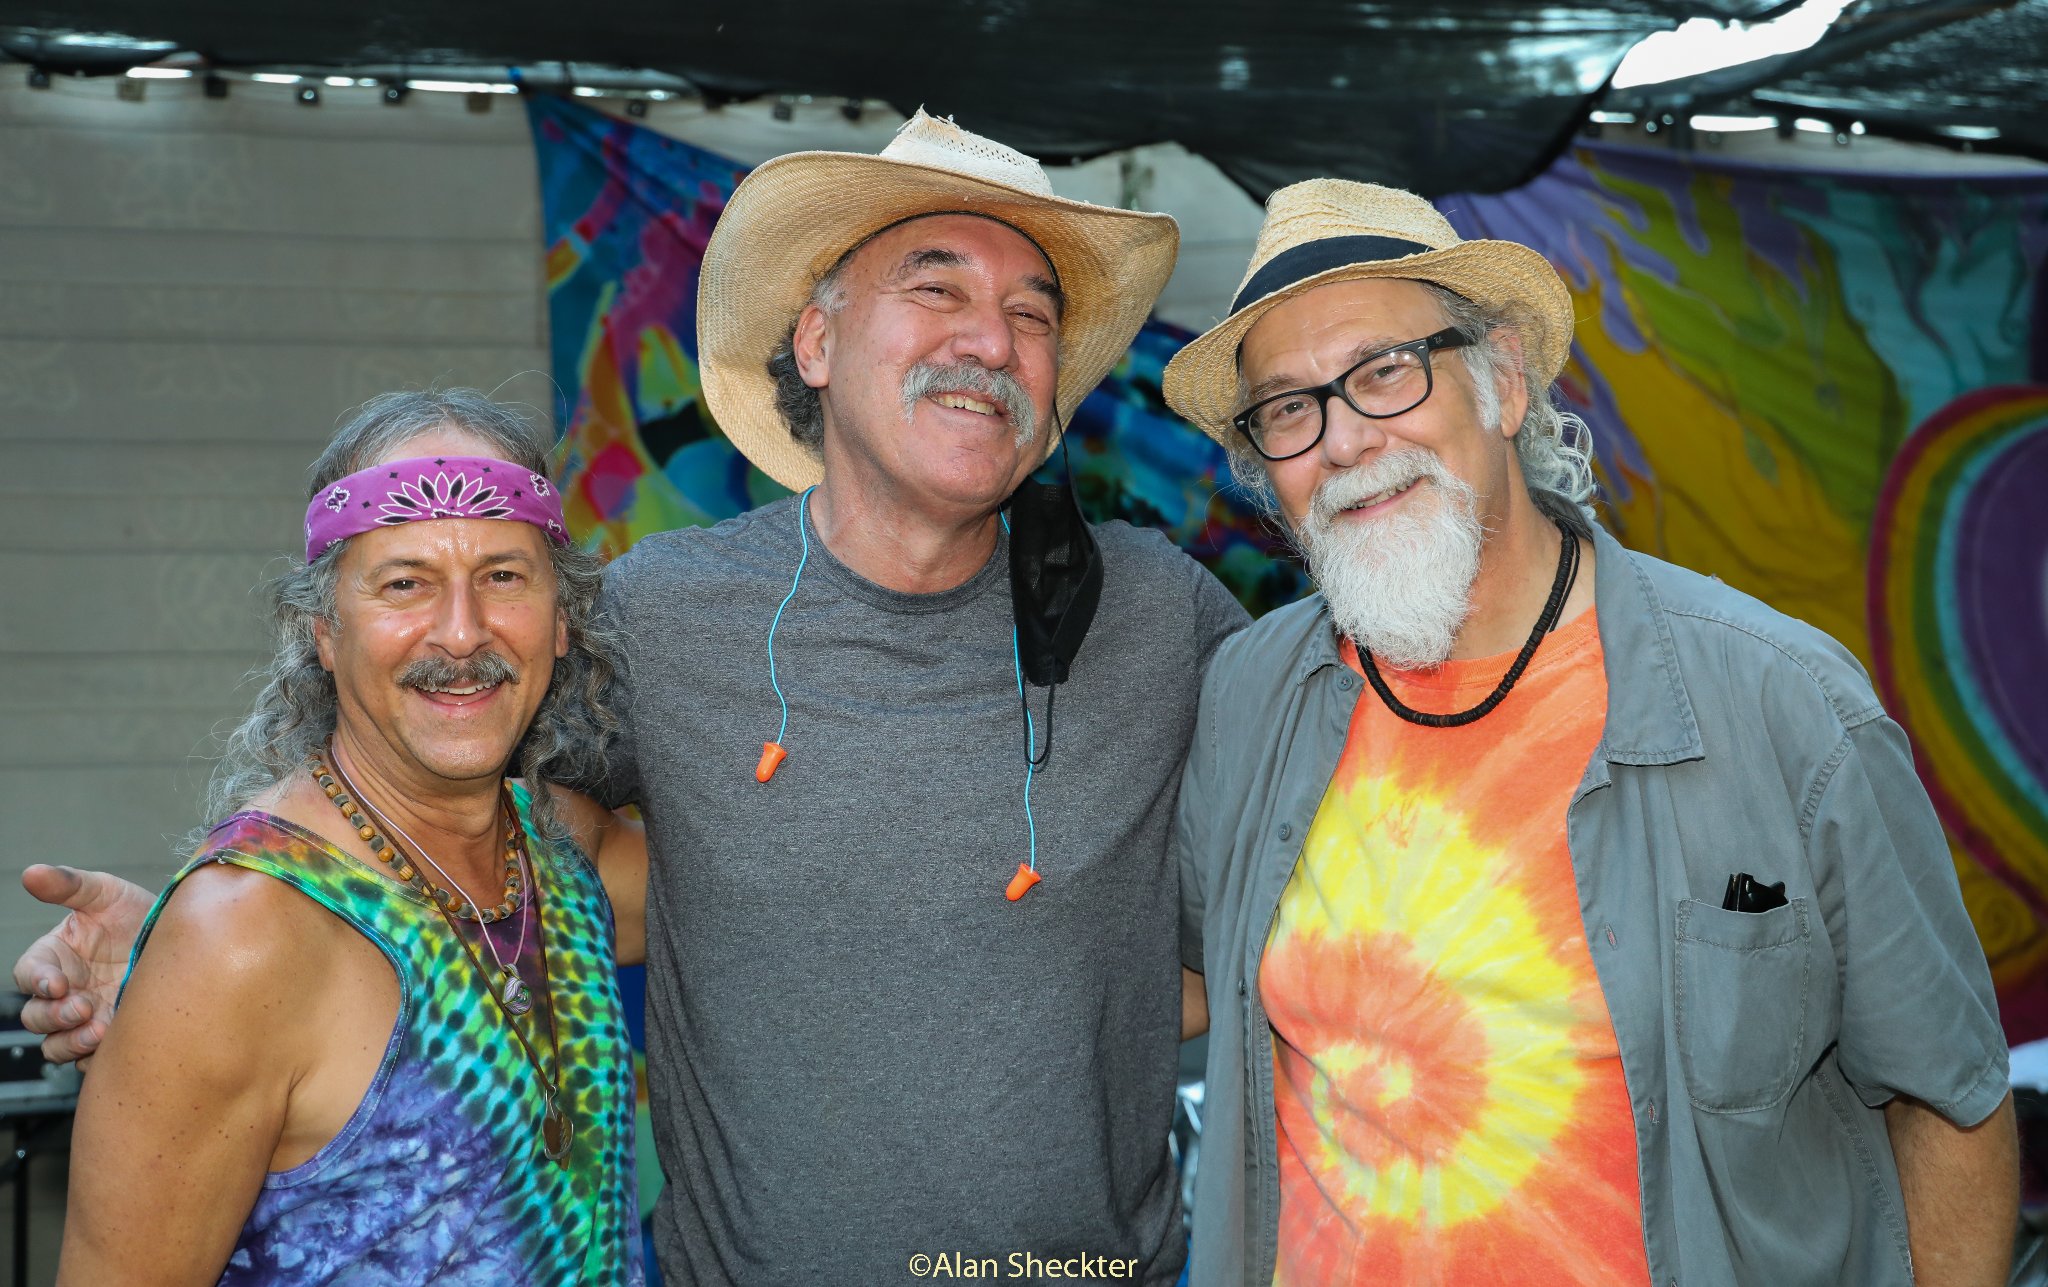 Barry Sless (from left), Bobby Vega, and Mookie Siegel get set to perform as the Skeleton Crew, which was quicky assembled in place of Steve Kimock who was unable to attend